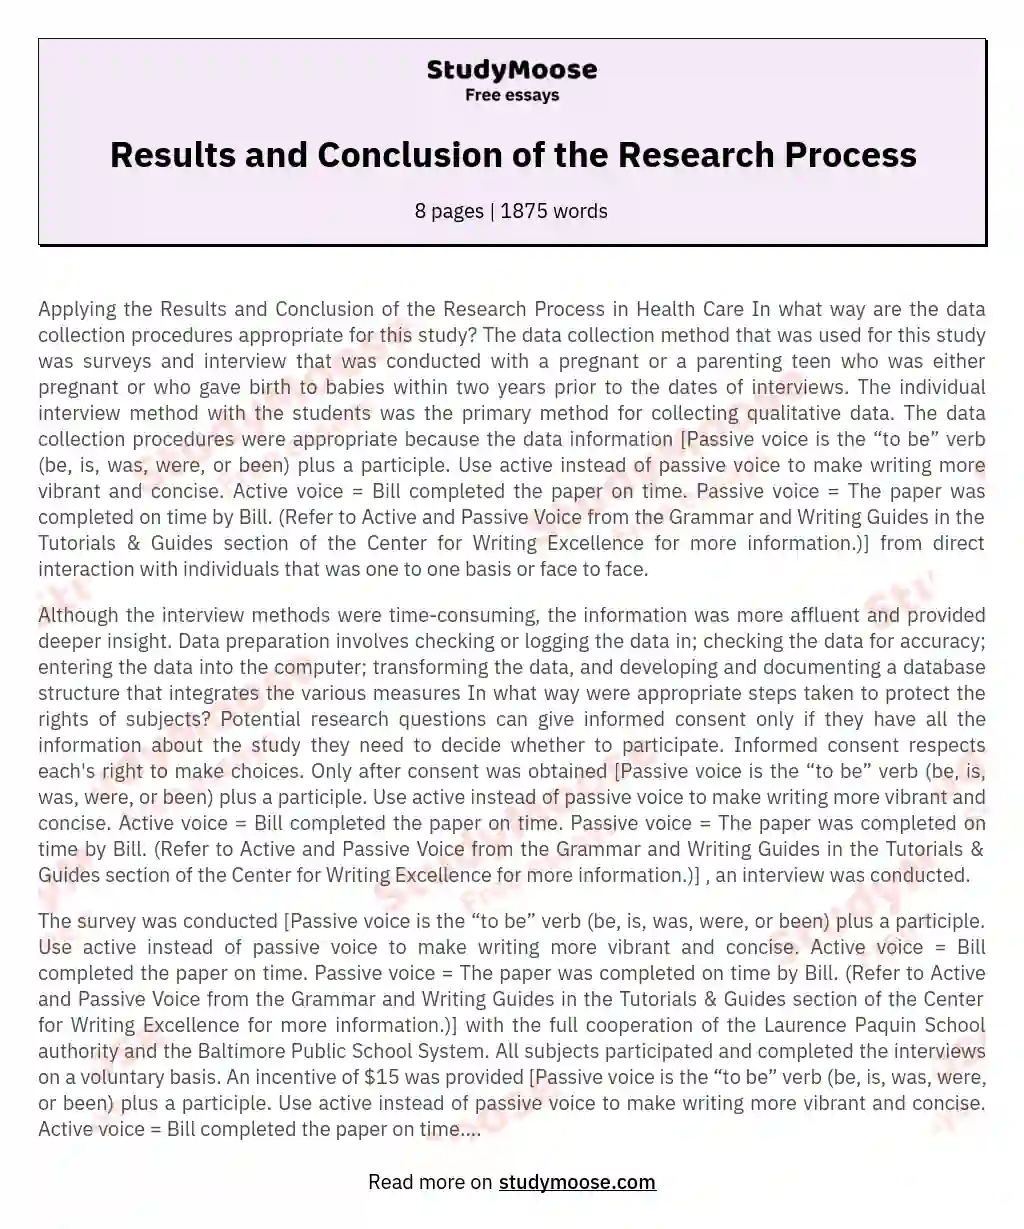 Results and Conclusion of the Research Process essay